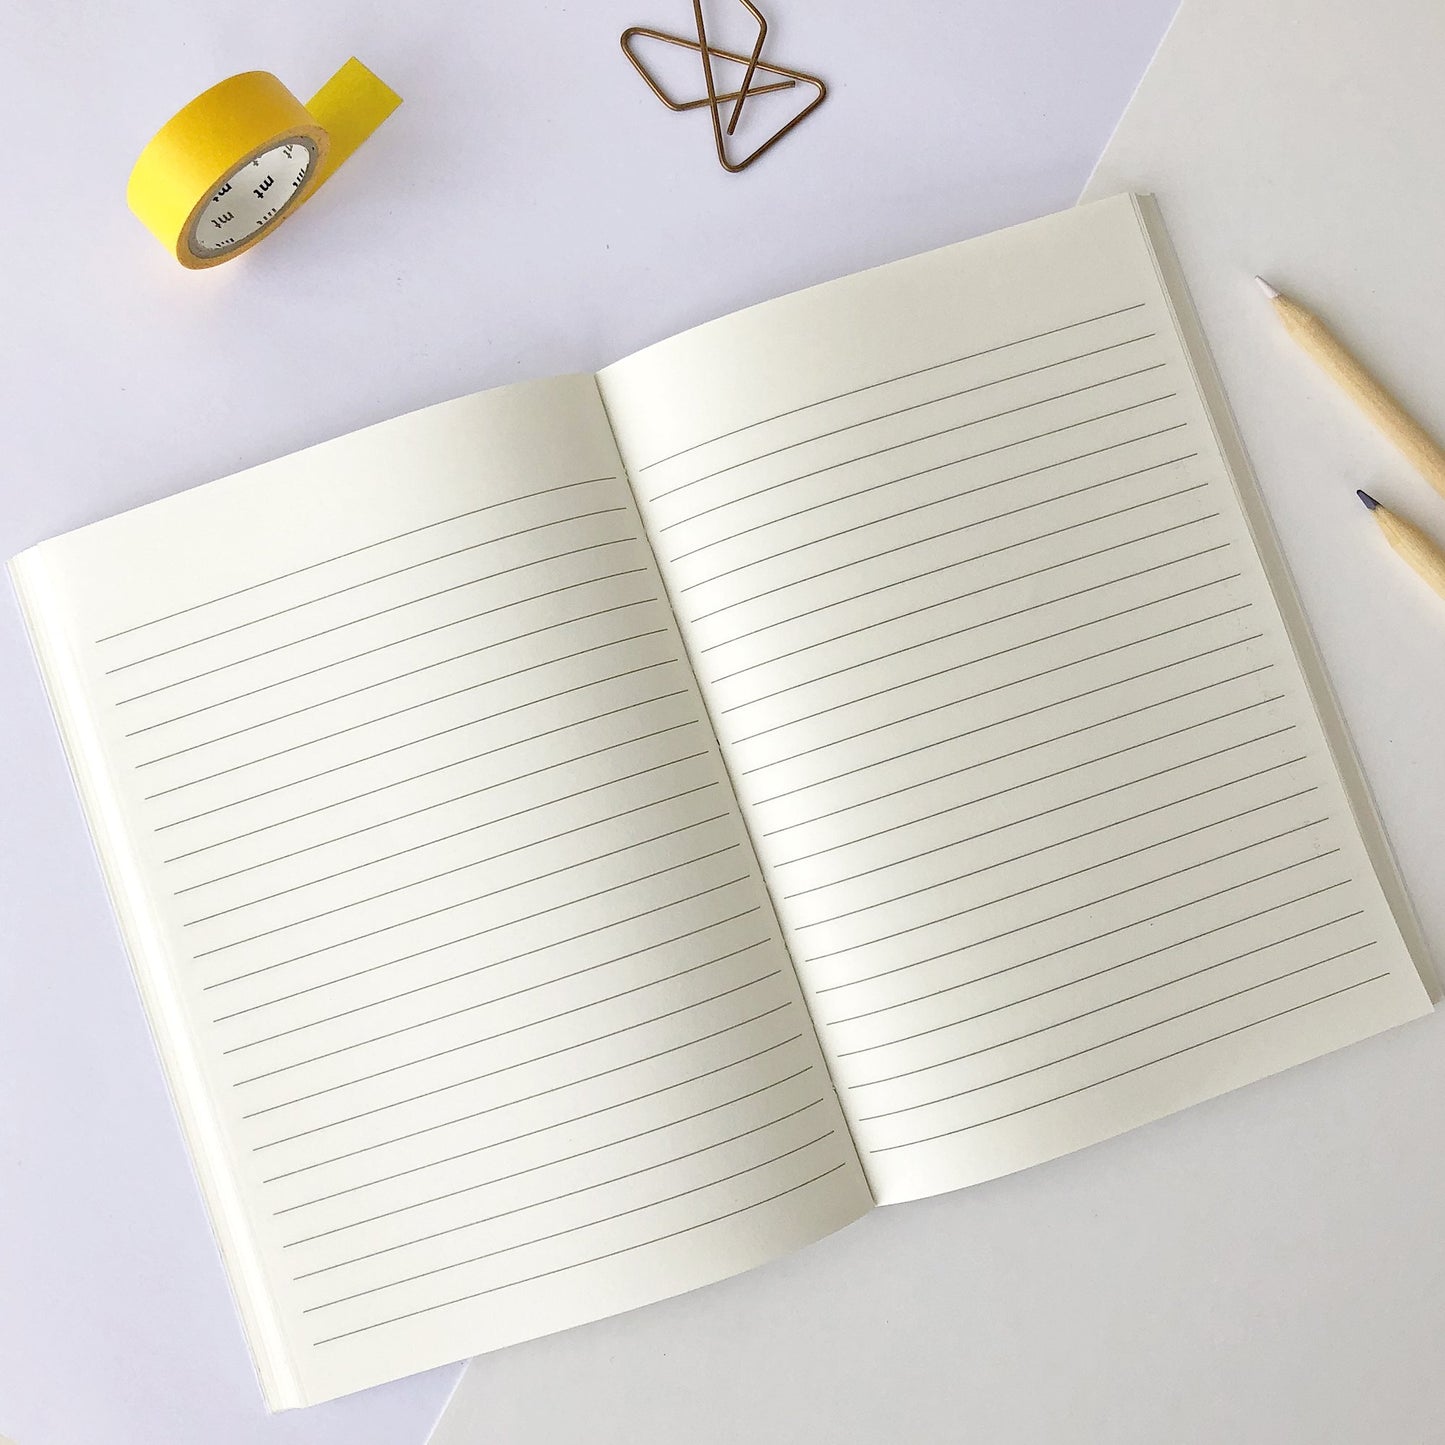 'My First Novel' Notebook with striped design - Sukie